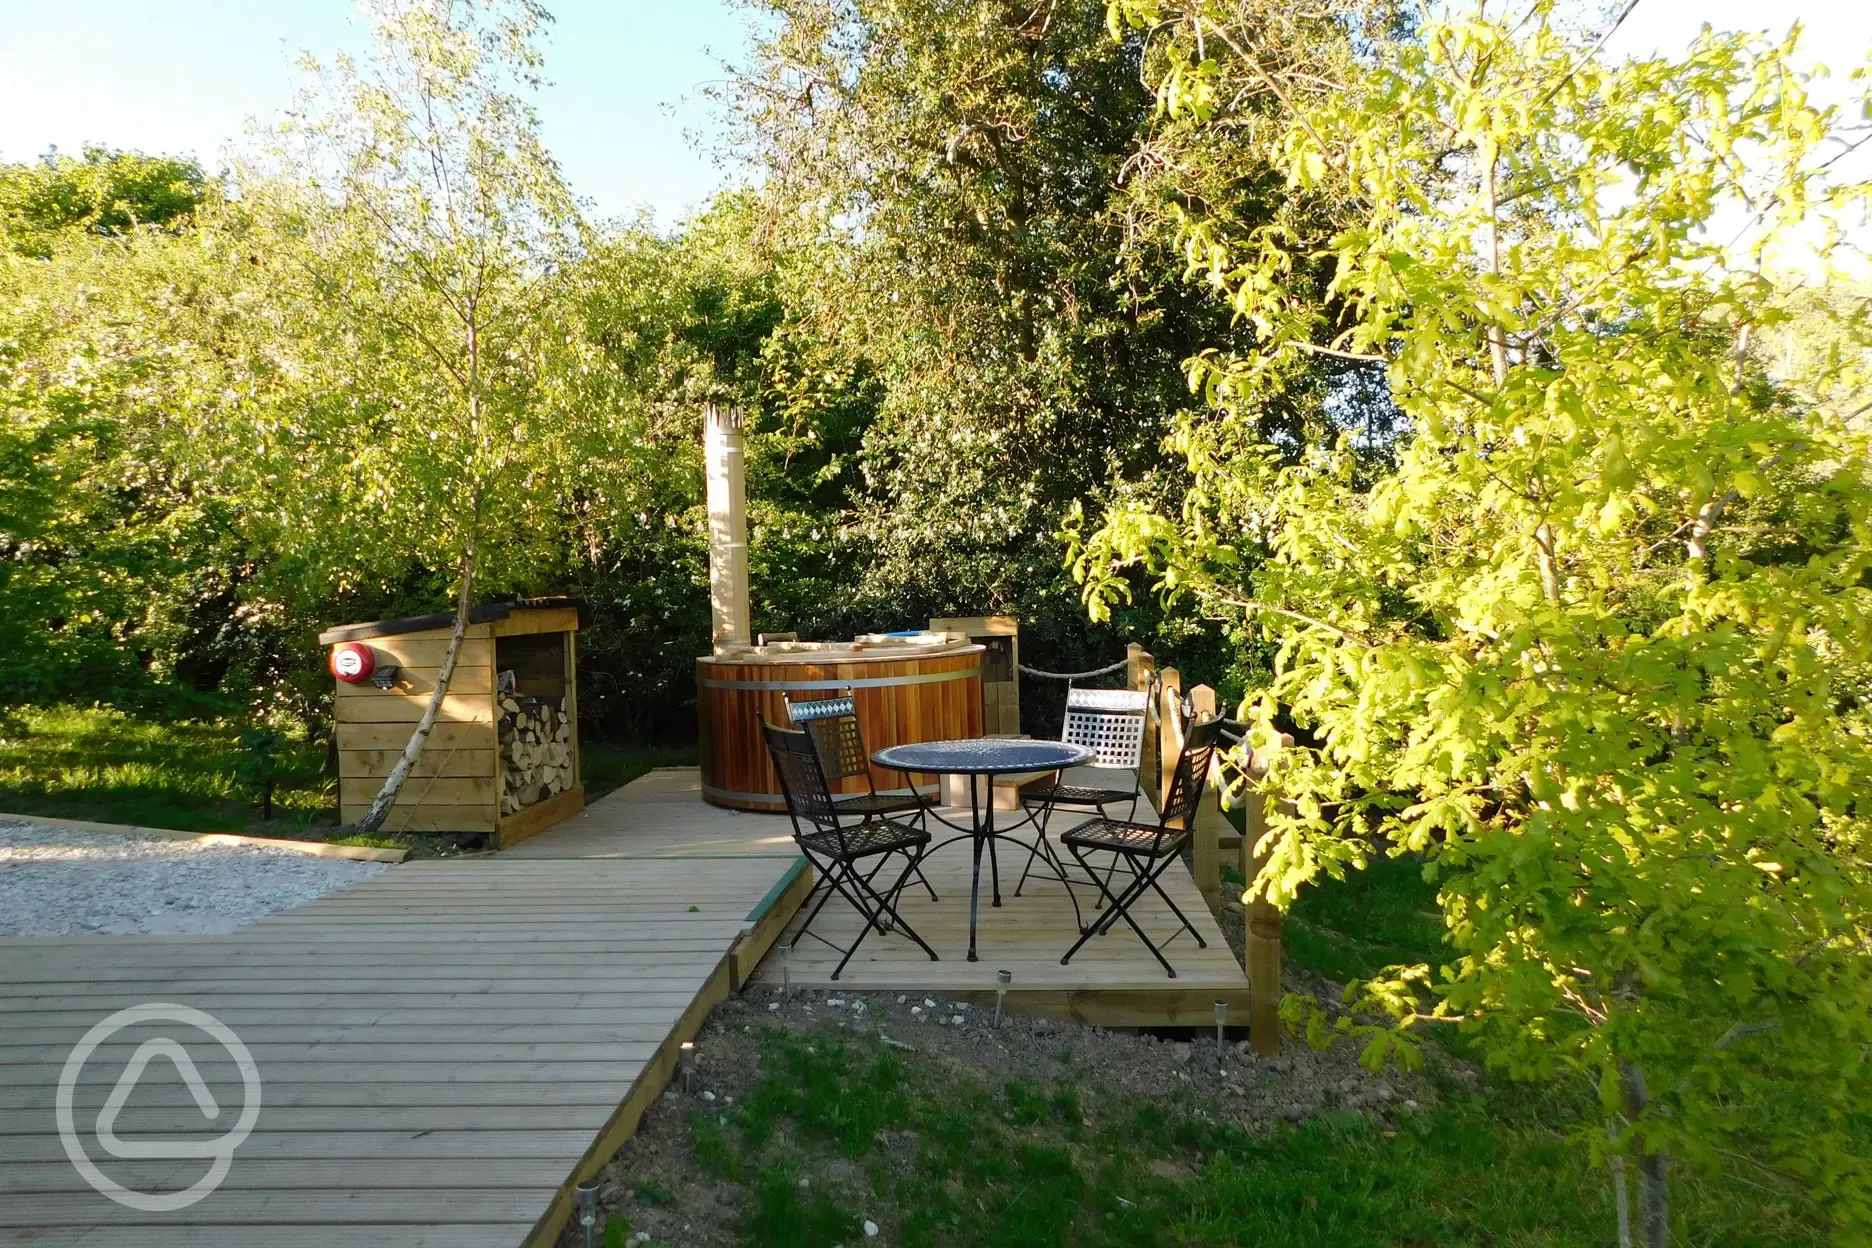 Yurt outdoor decking and wood-fired hot tub